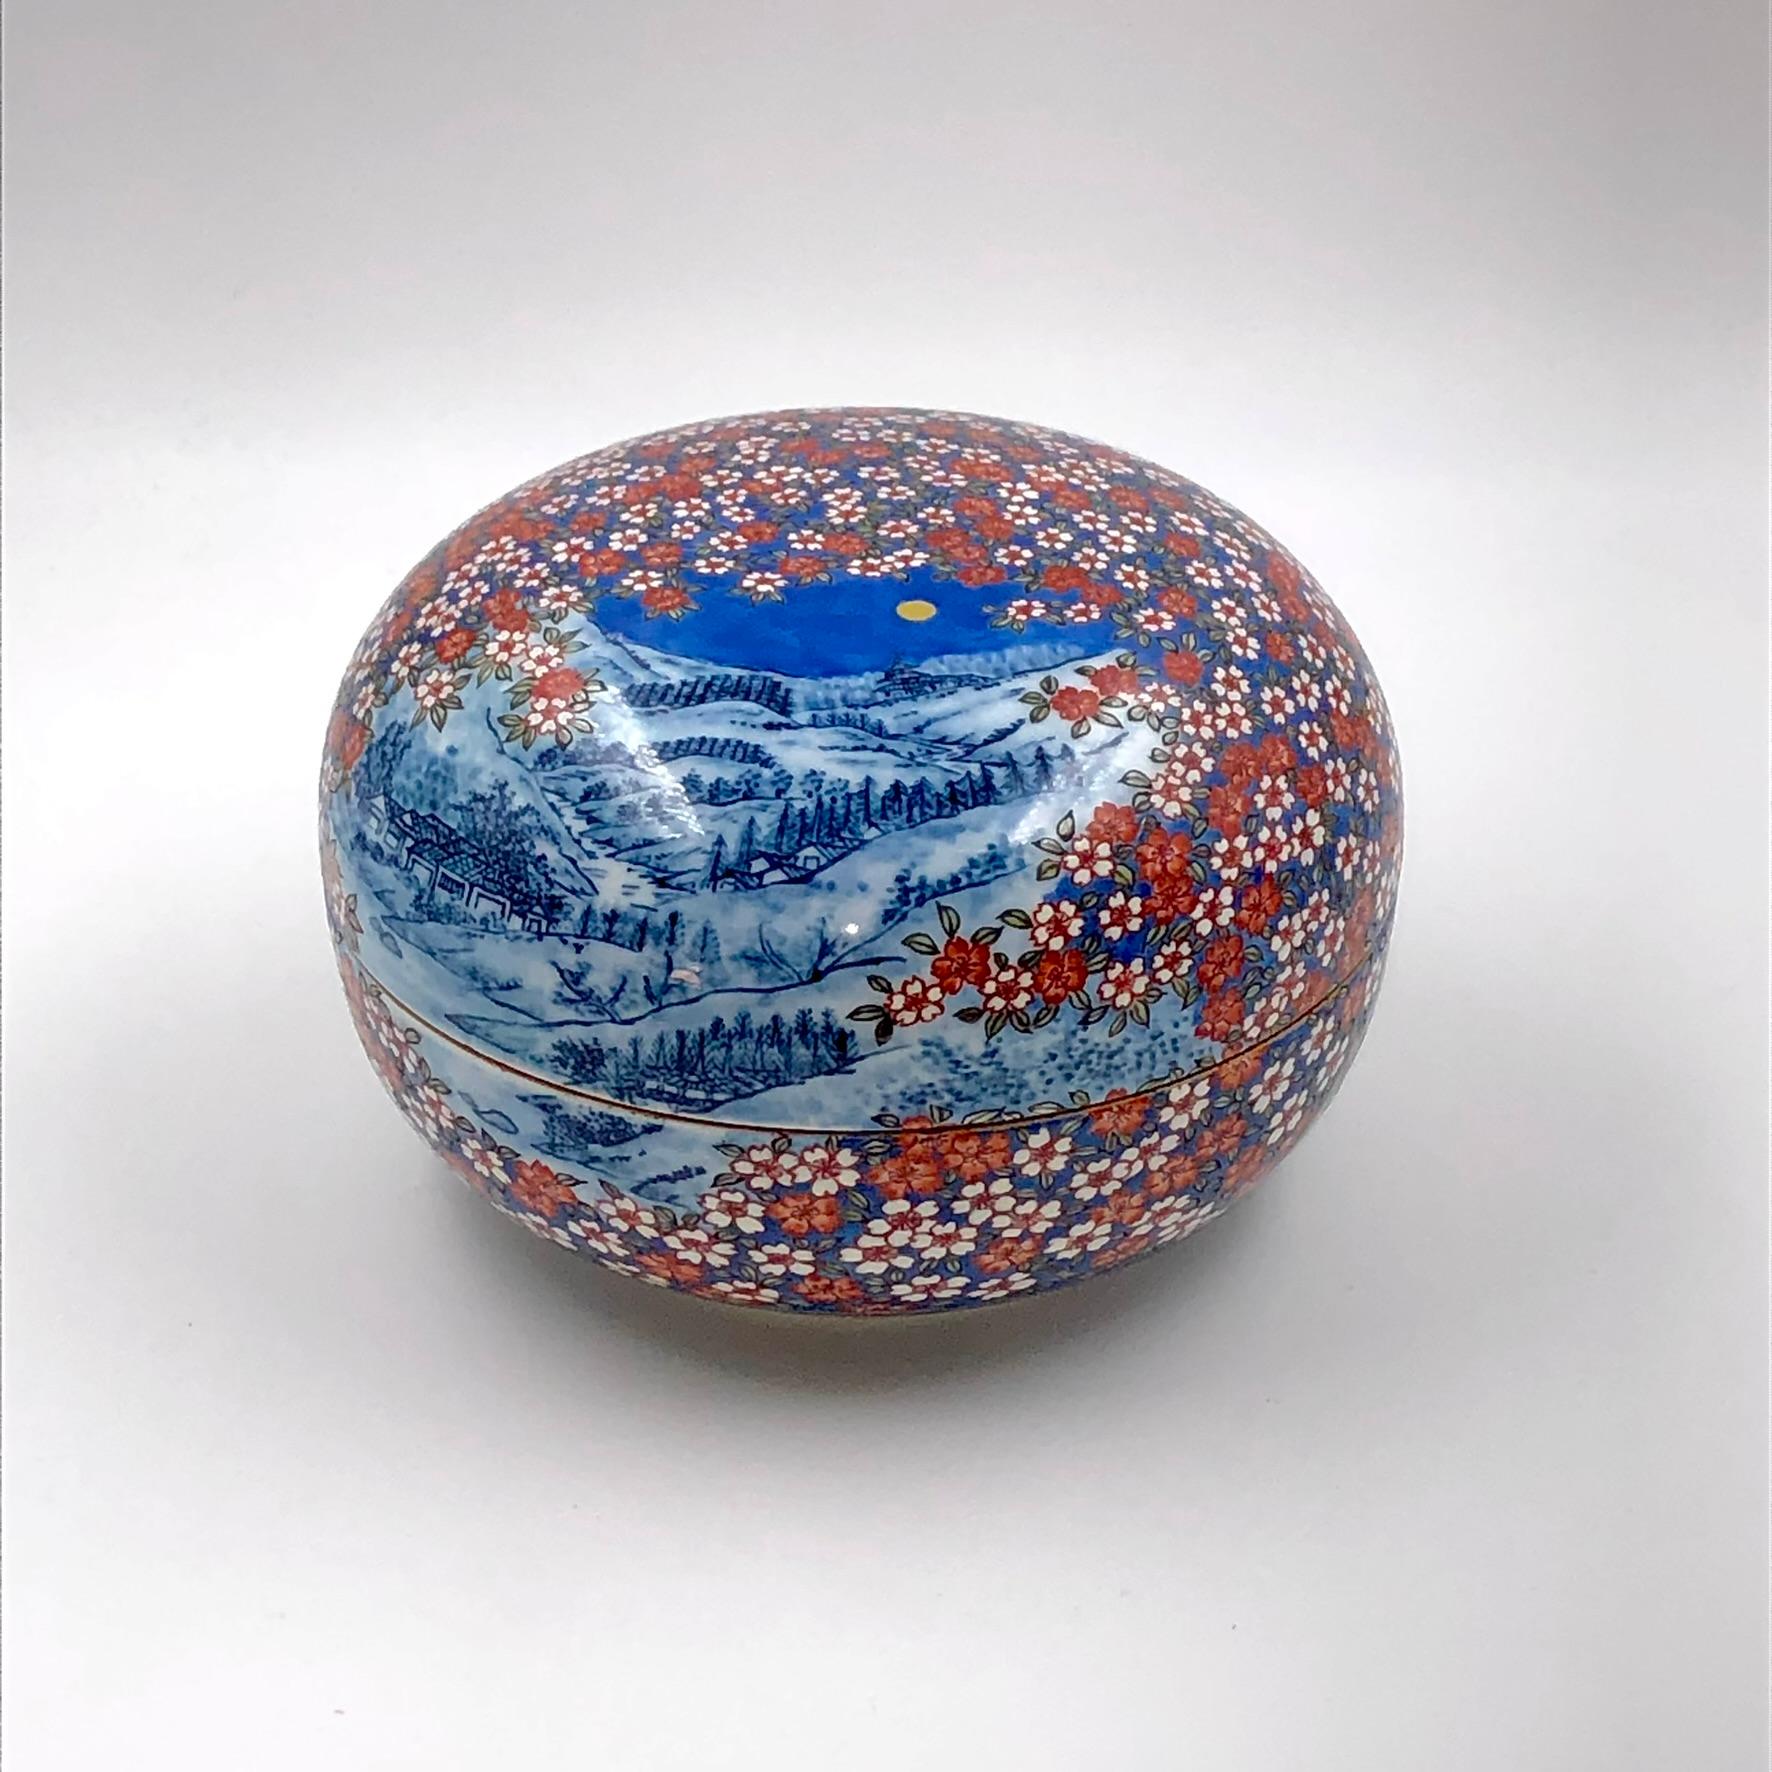 Mesmerizing Japanese contemporary museum-quality decorative porcelain box, painstakingly intricately hand-painted in blue underglaze on the inside and in blue and red Set against a stunning globular background in dark blue on the outside , a signed